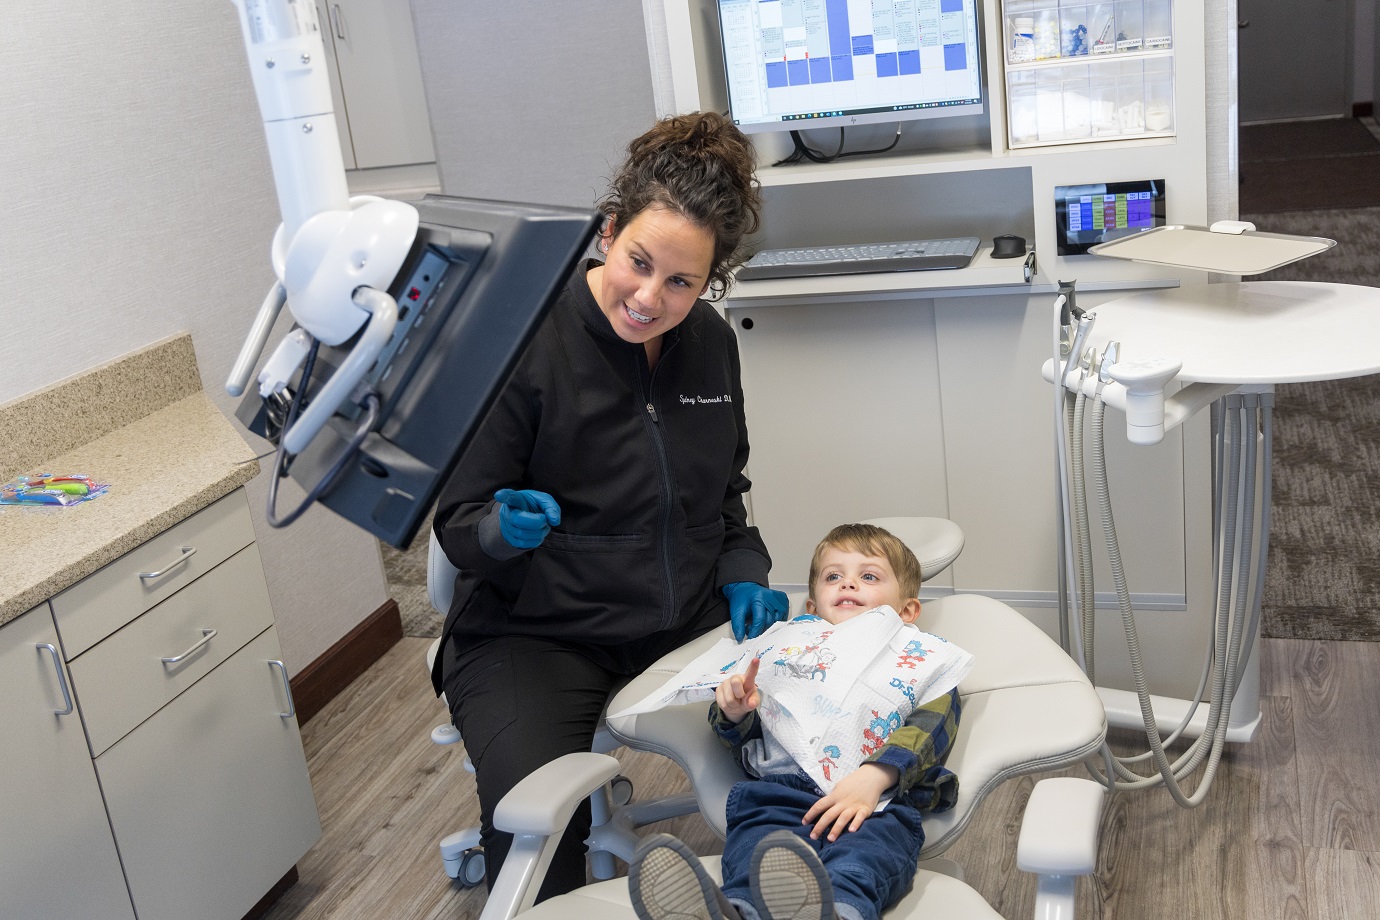 A dentist is showing something on the screen to her child patient